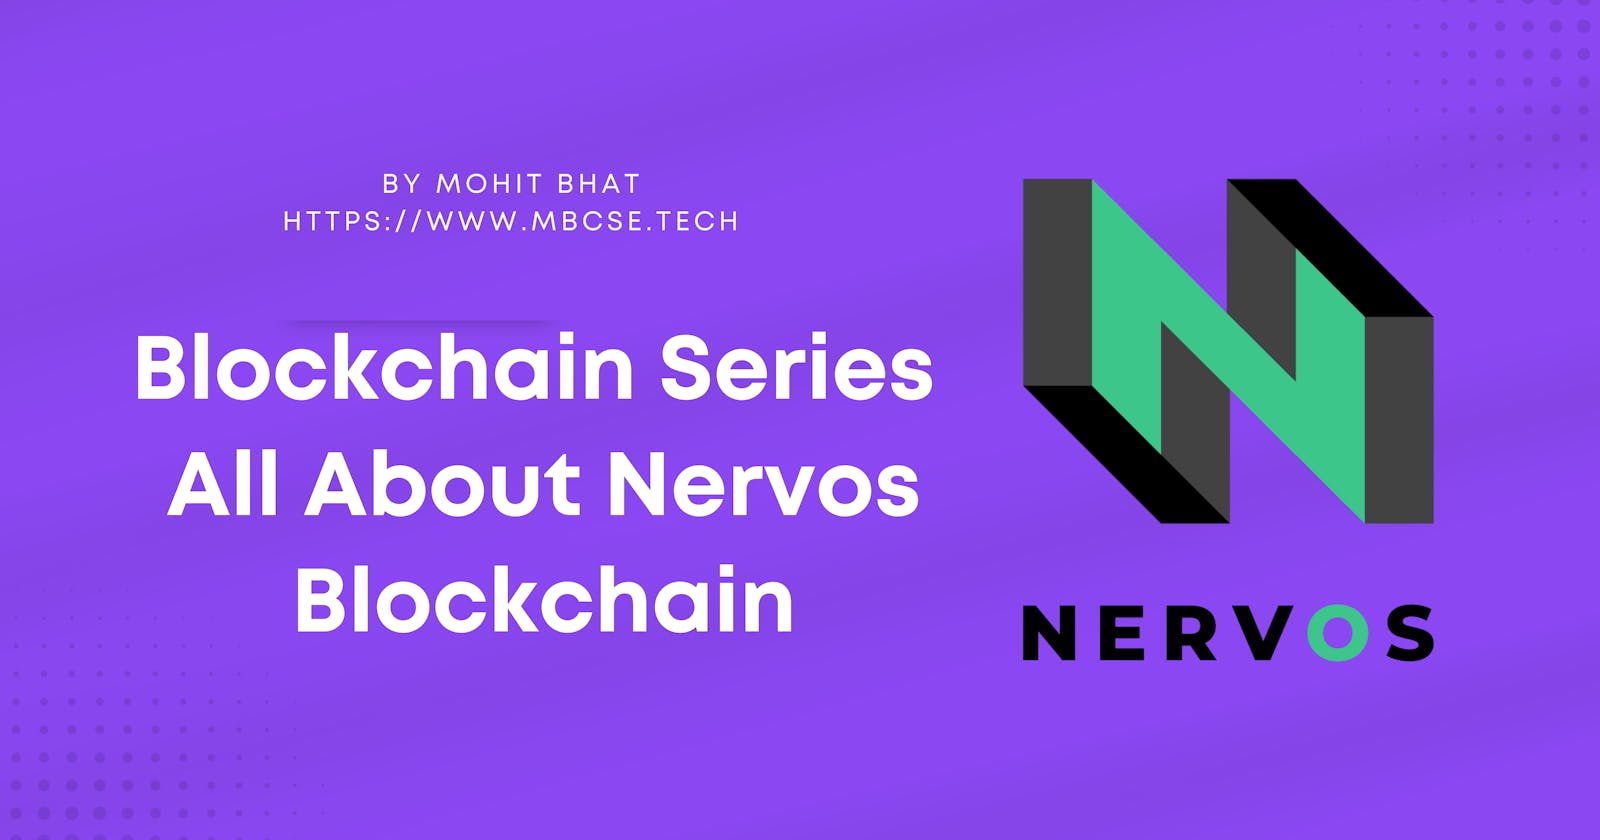 Get started with Nervos- An In-depth Overview of Nervos Network Architecture